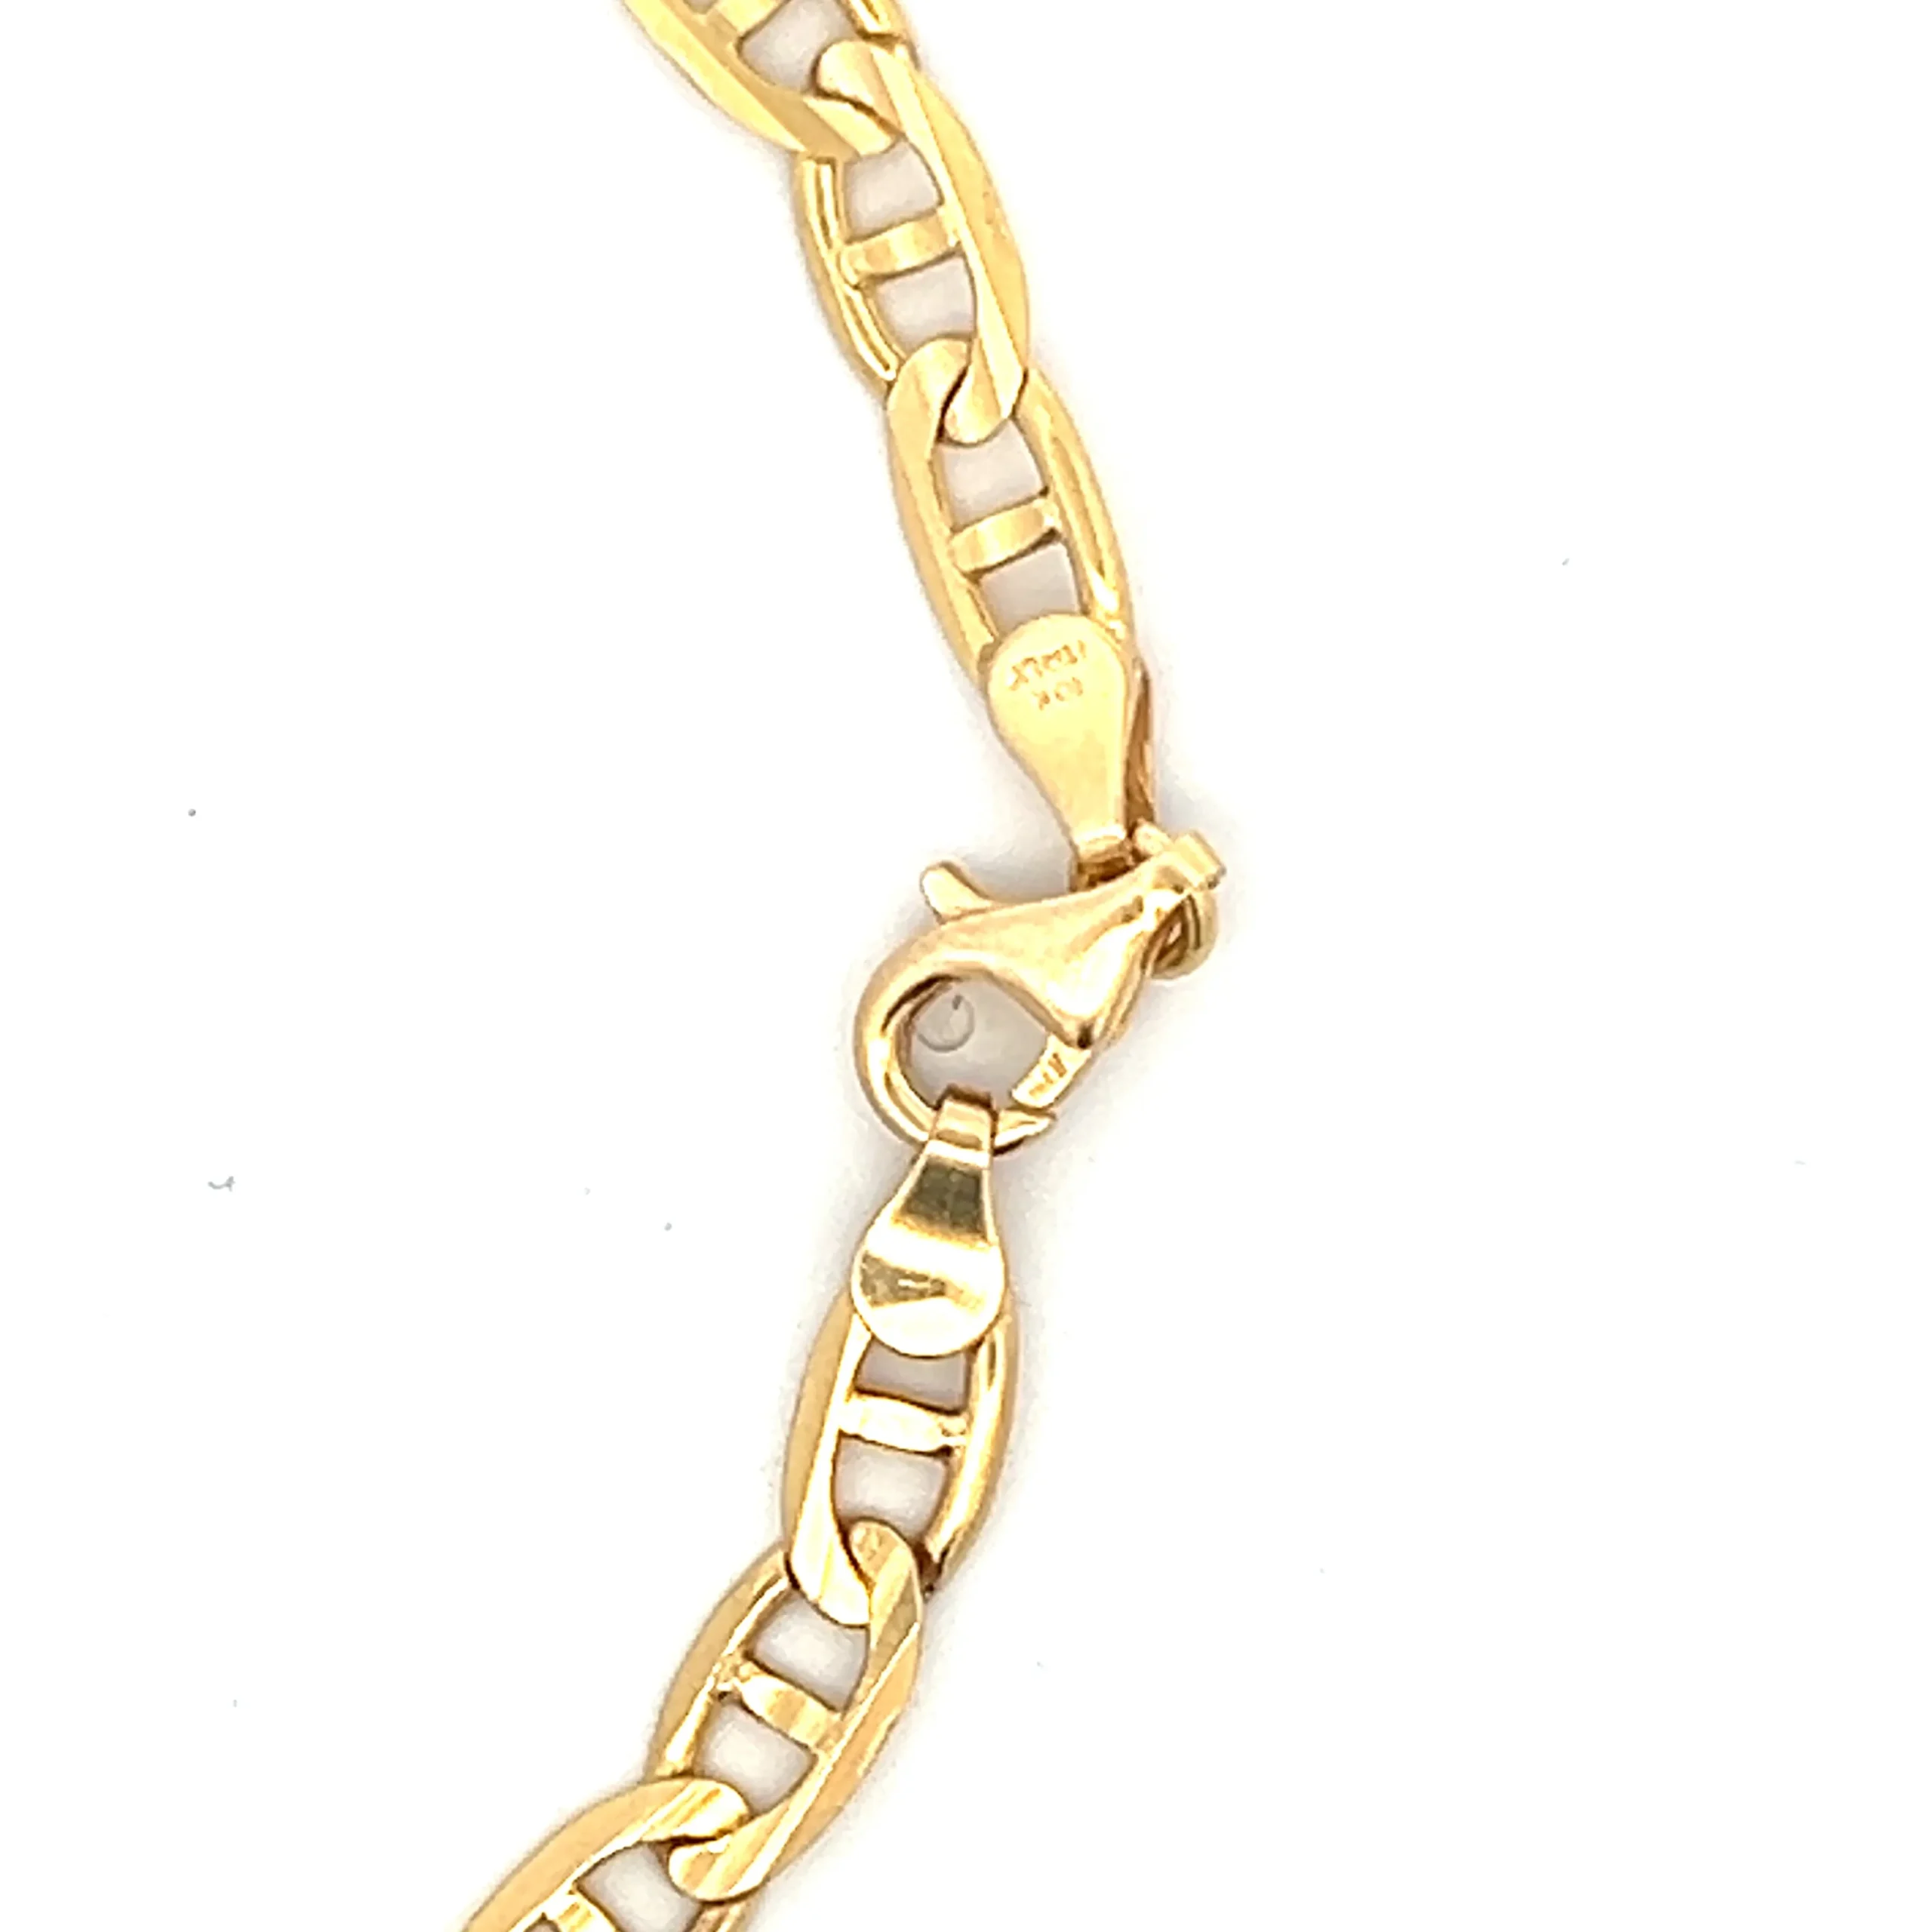 Estate 10K Yellow Gold Anchor Link Bracelet - 5.5mm wide with a lobster claw clasp, perfect for any occasion.